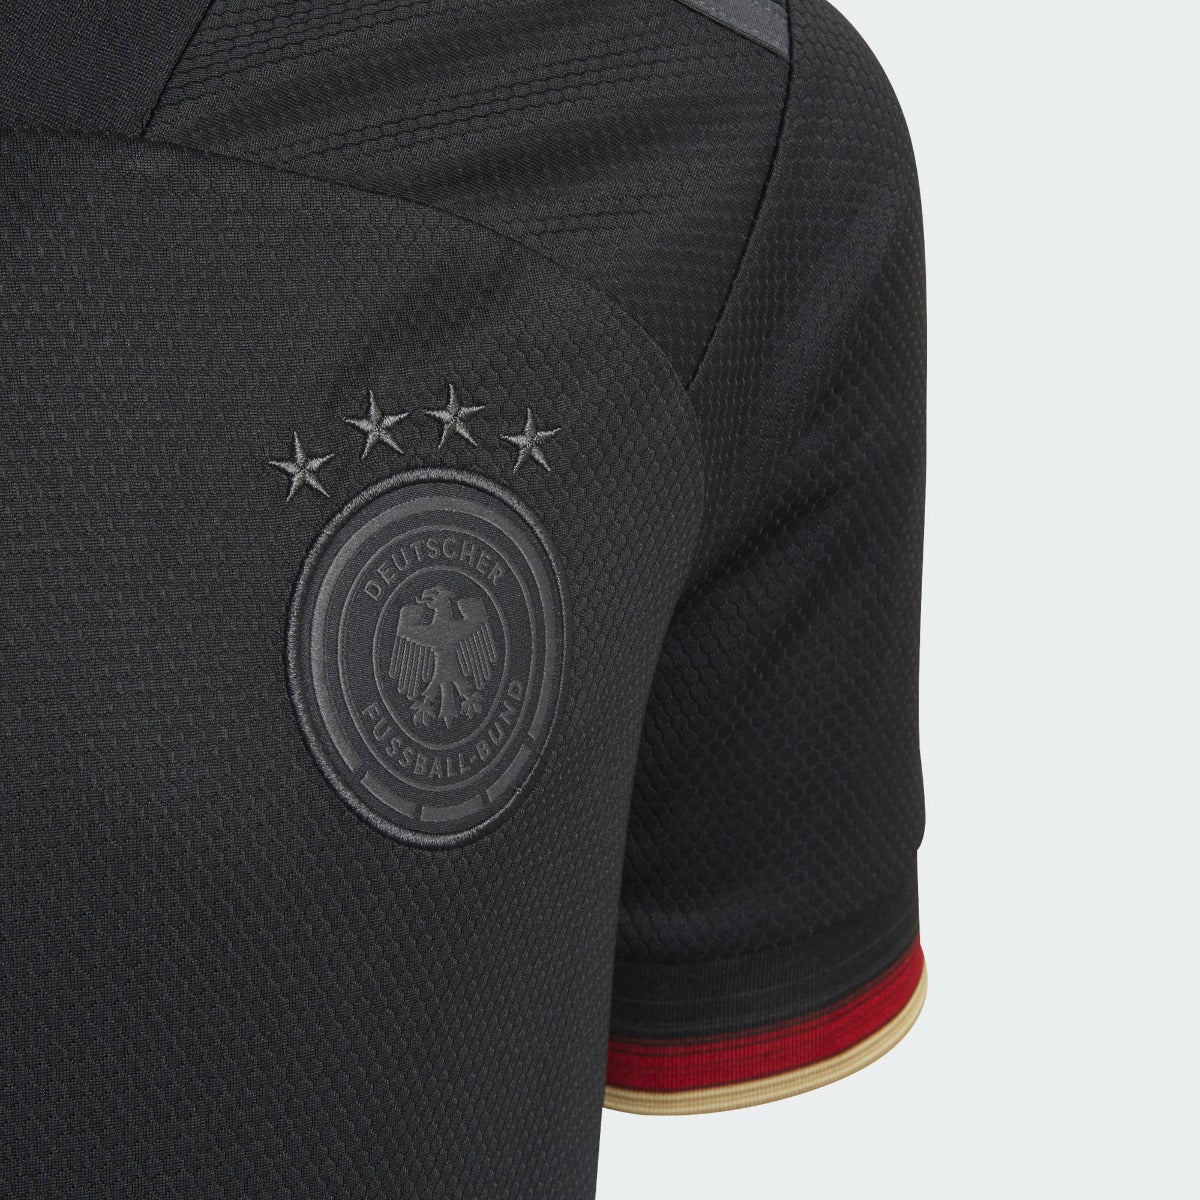 adidas 2020-21 Germany Away YOUTH Jersey - Black (Detail 2)